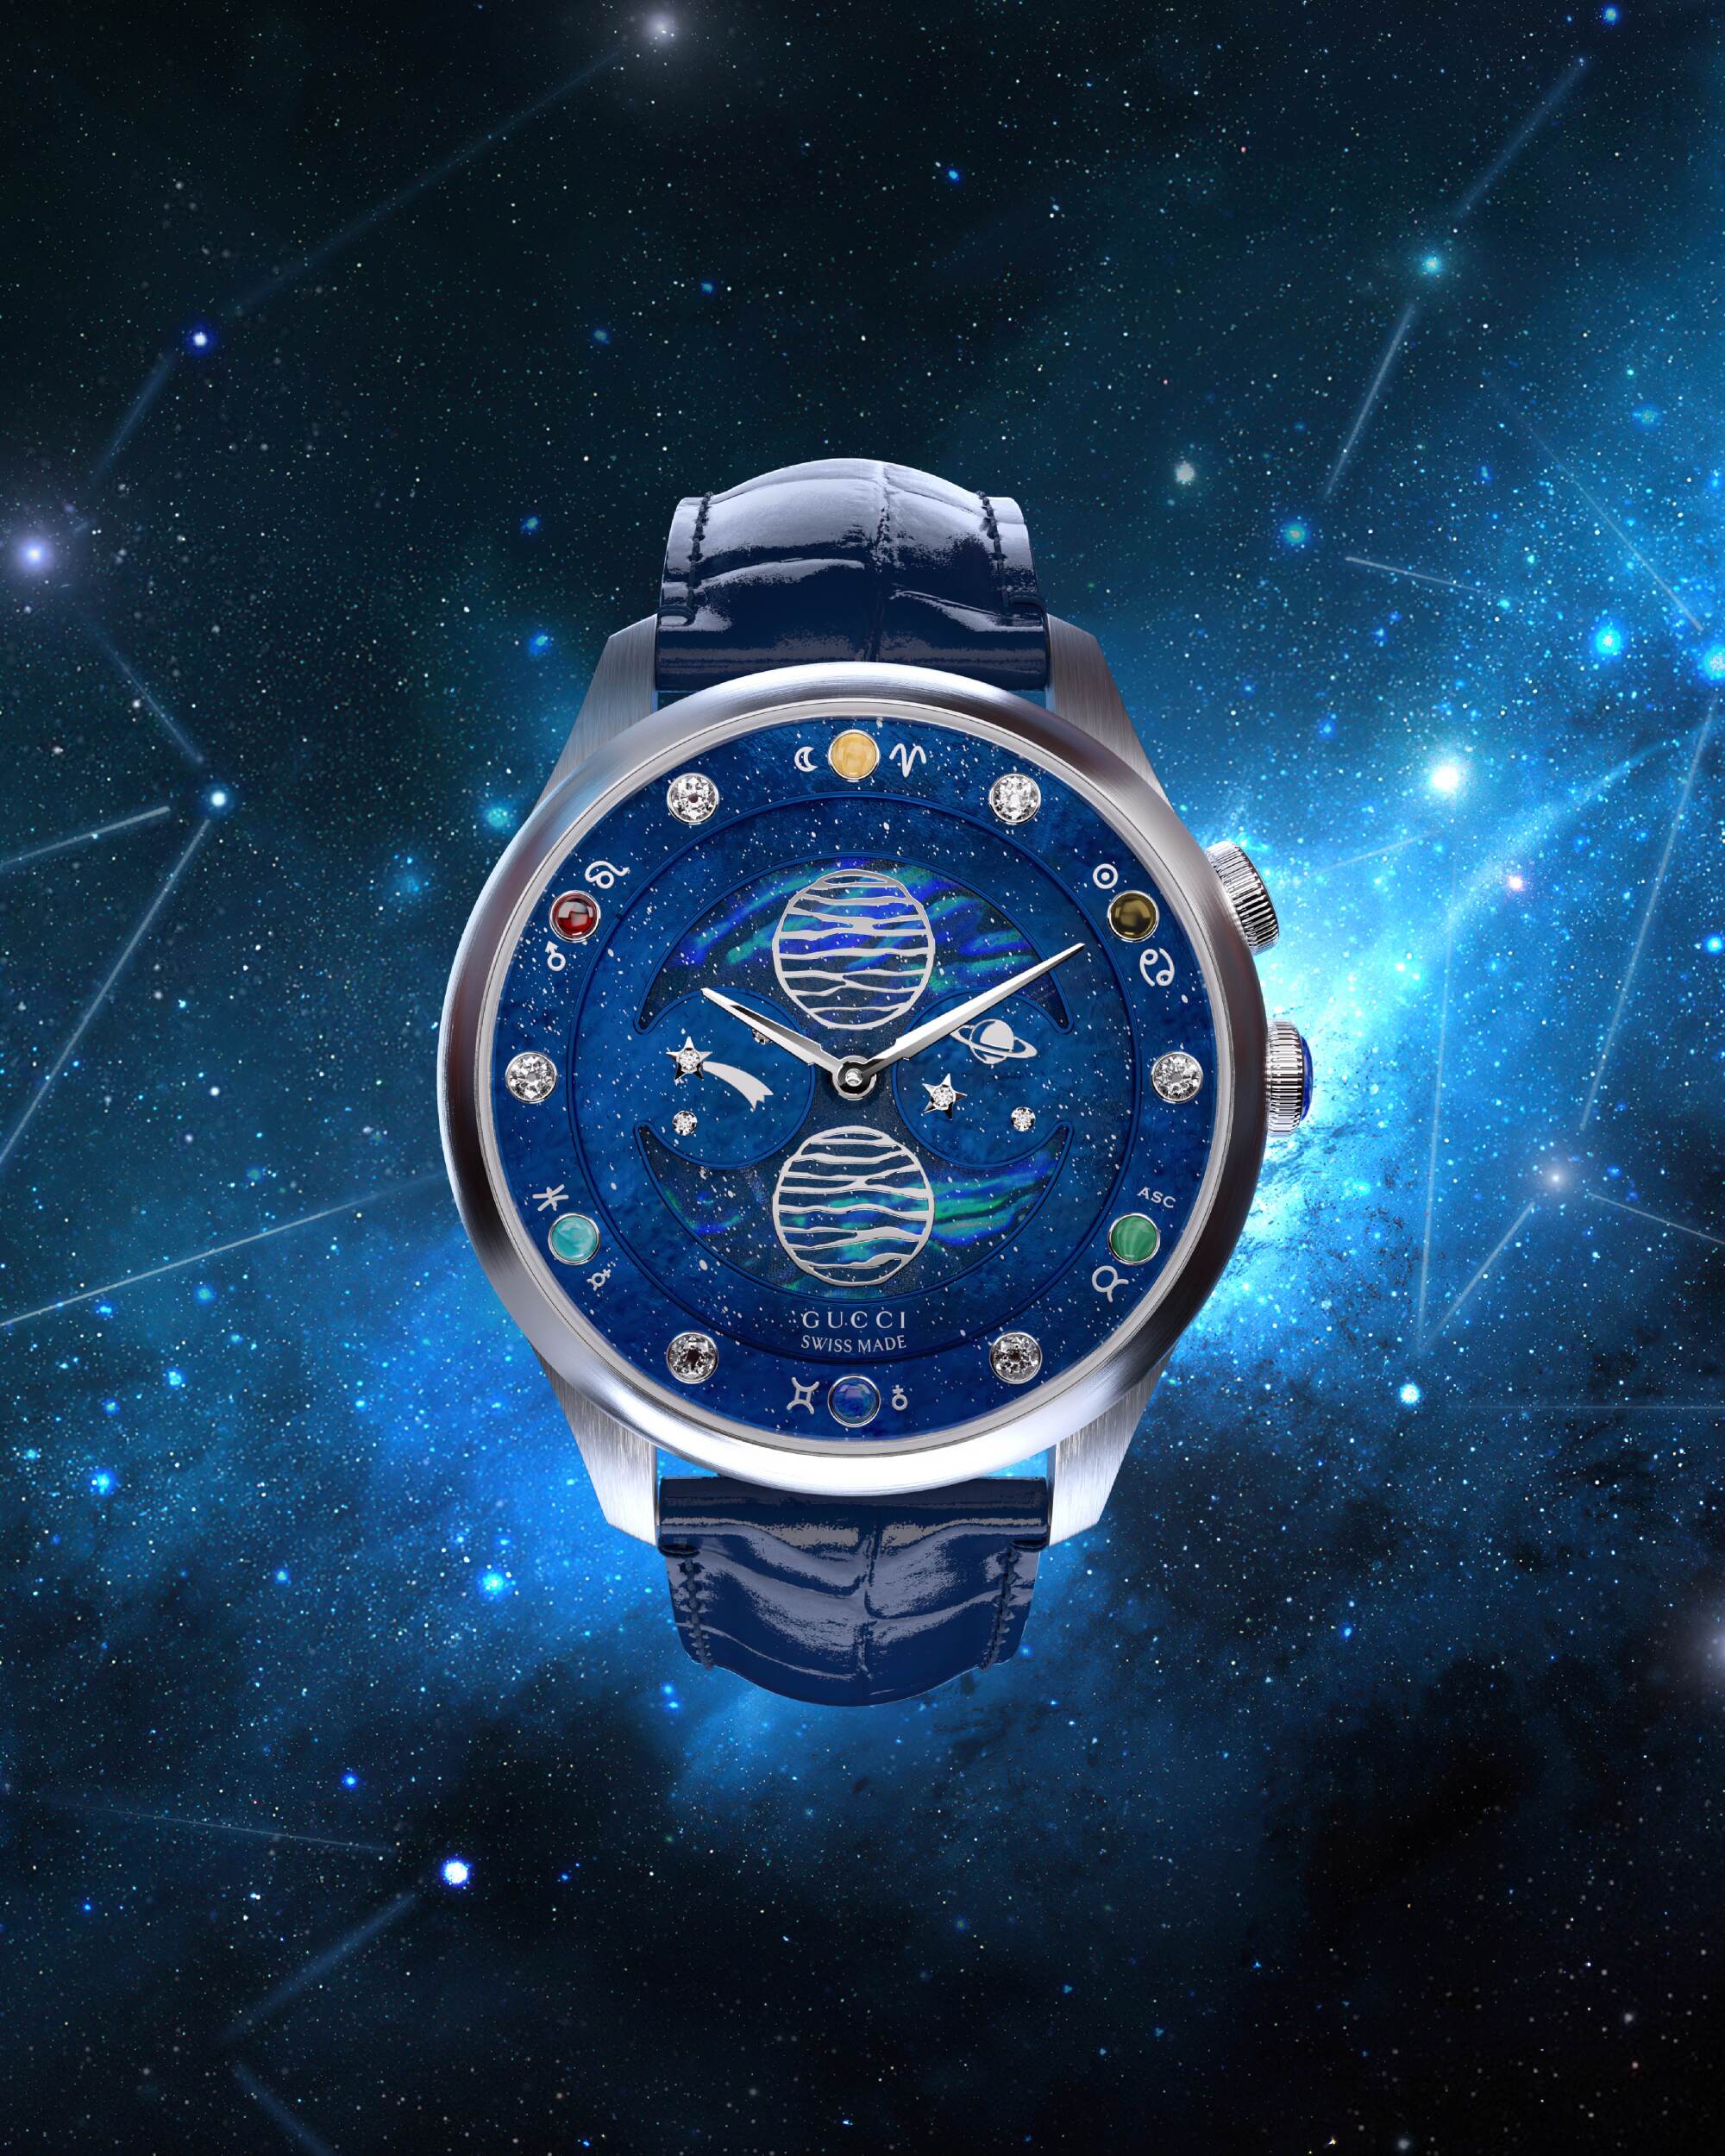 A blue-faced wristwatch against a starry-sky background